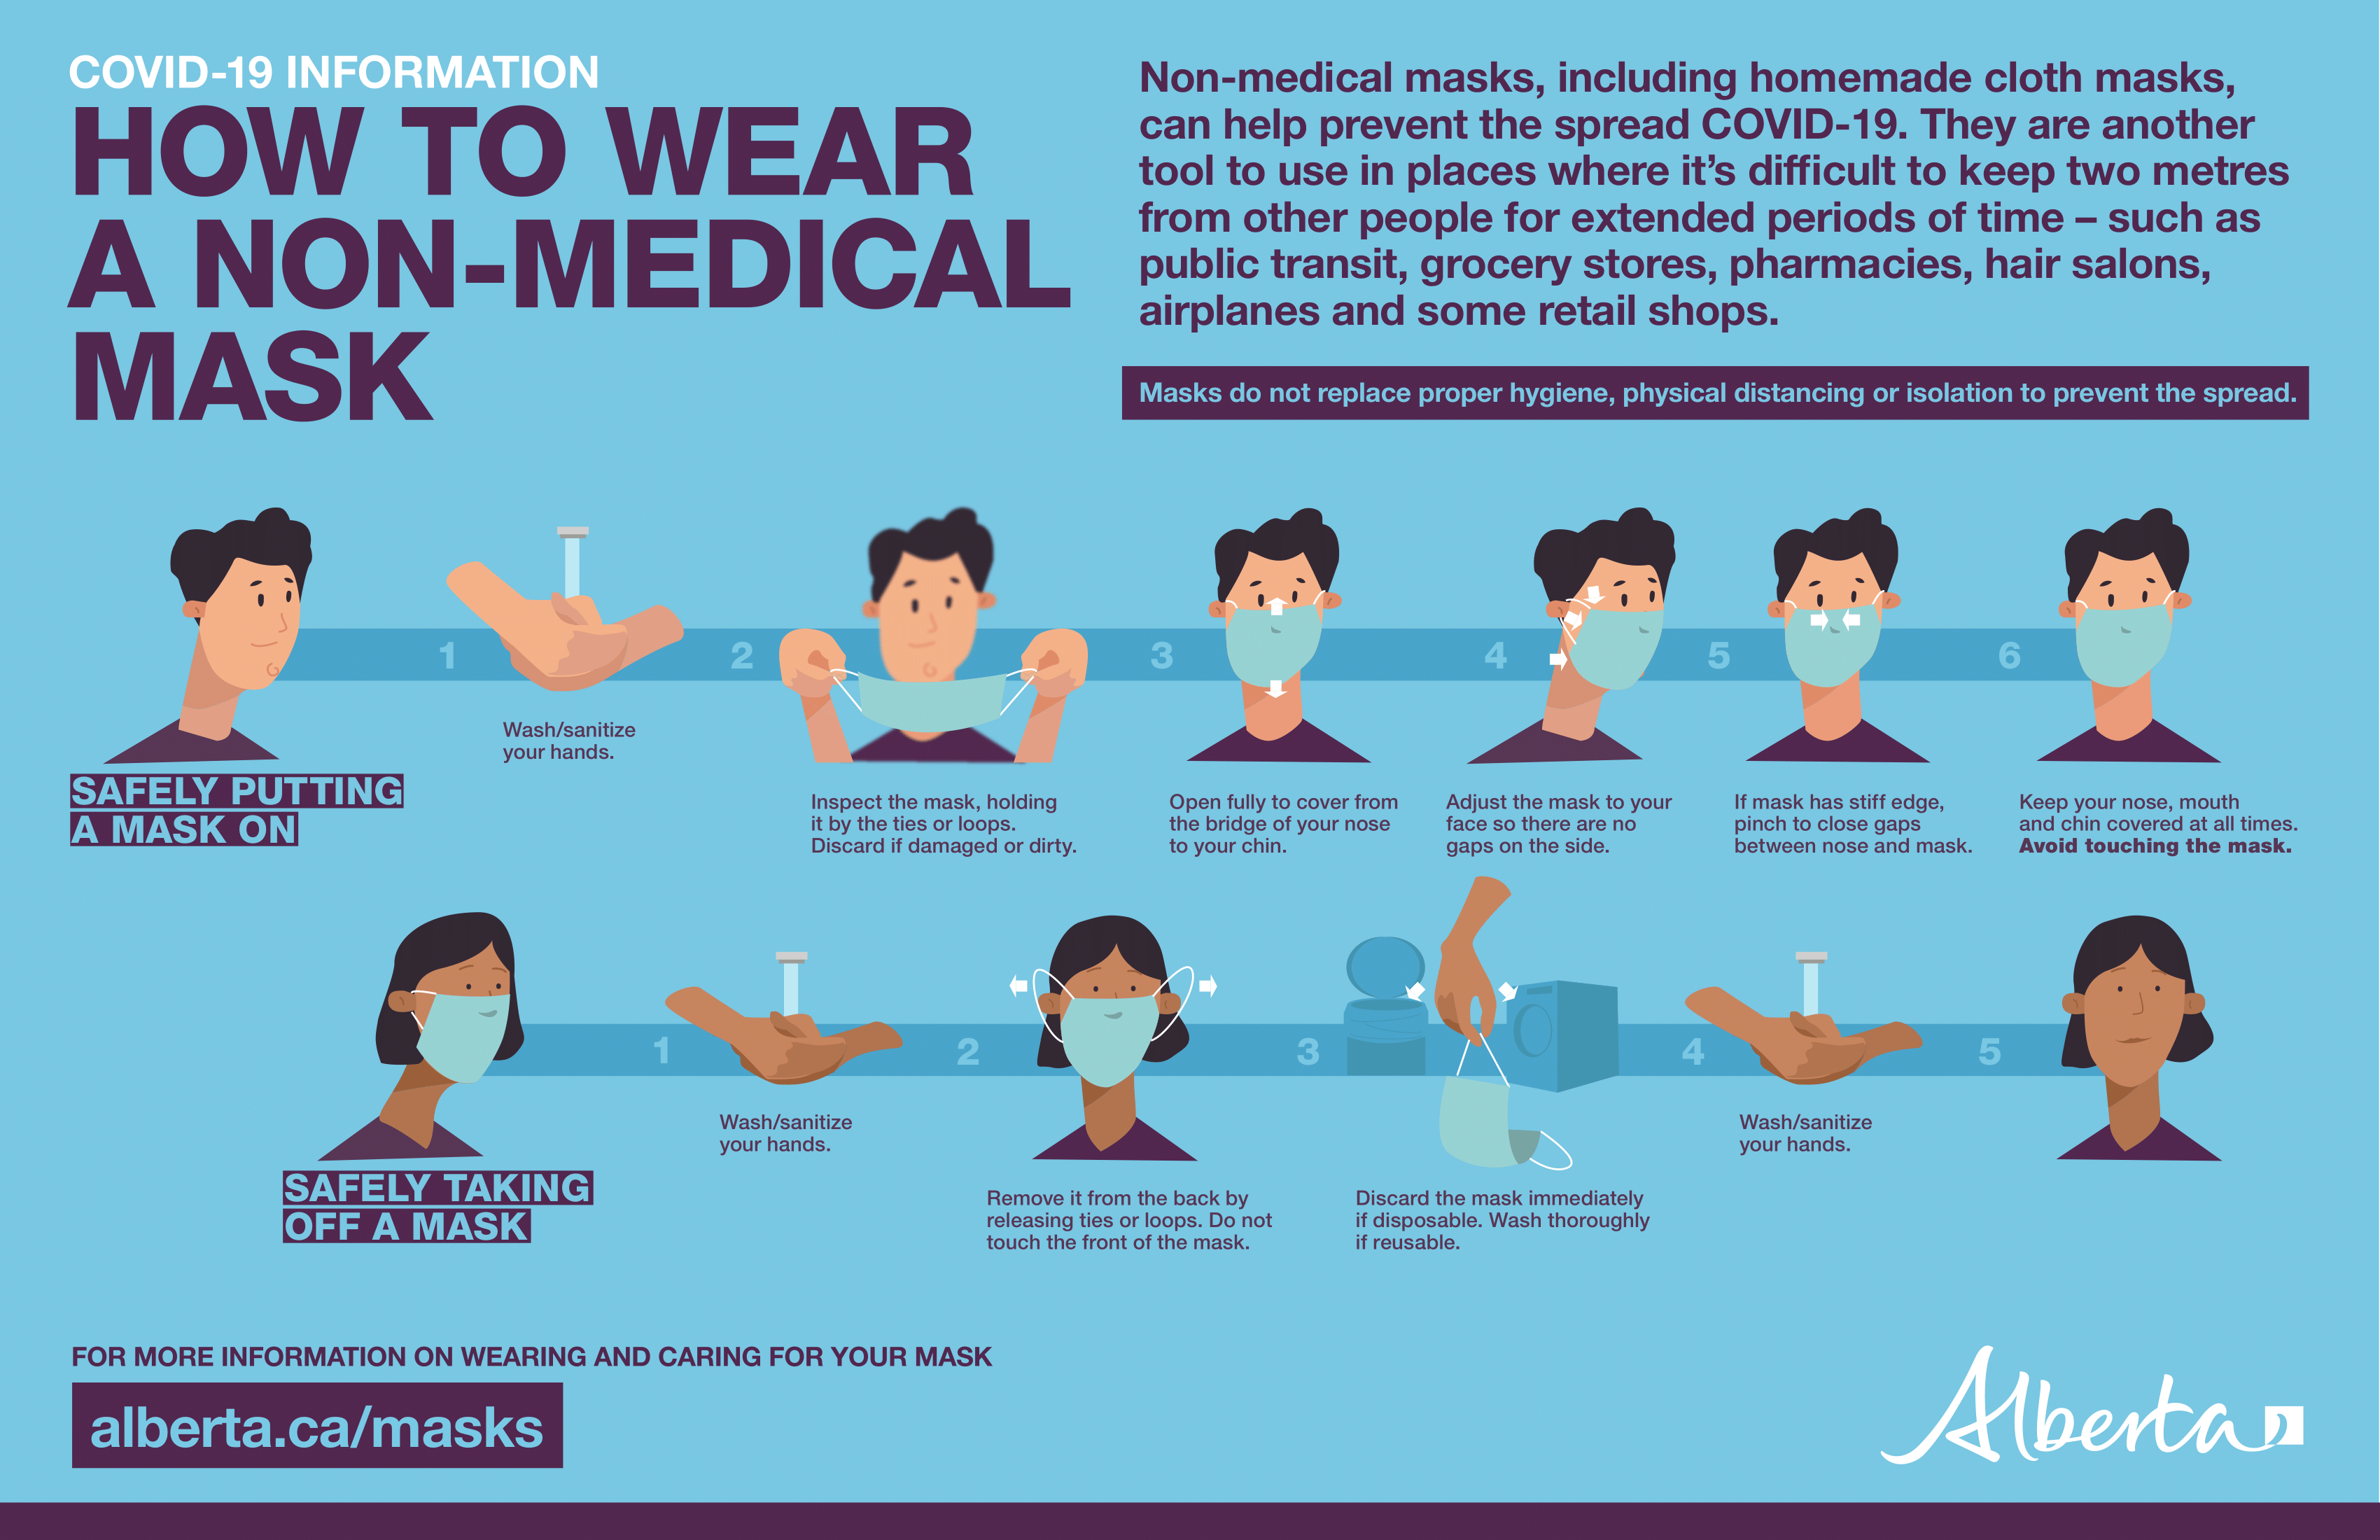 covid-19-how-to-wear-a-non-medical-mask-poster-11x17-colour-1